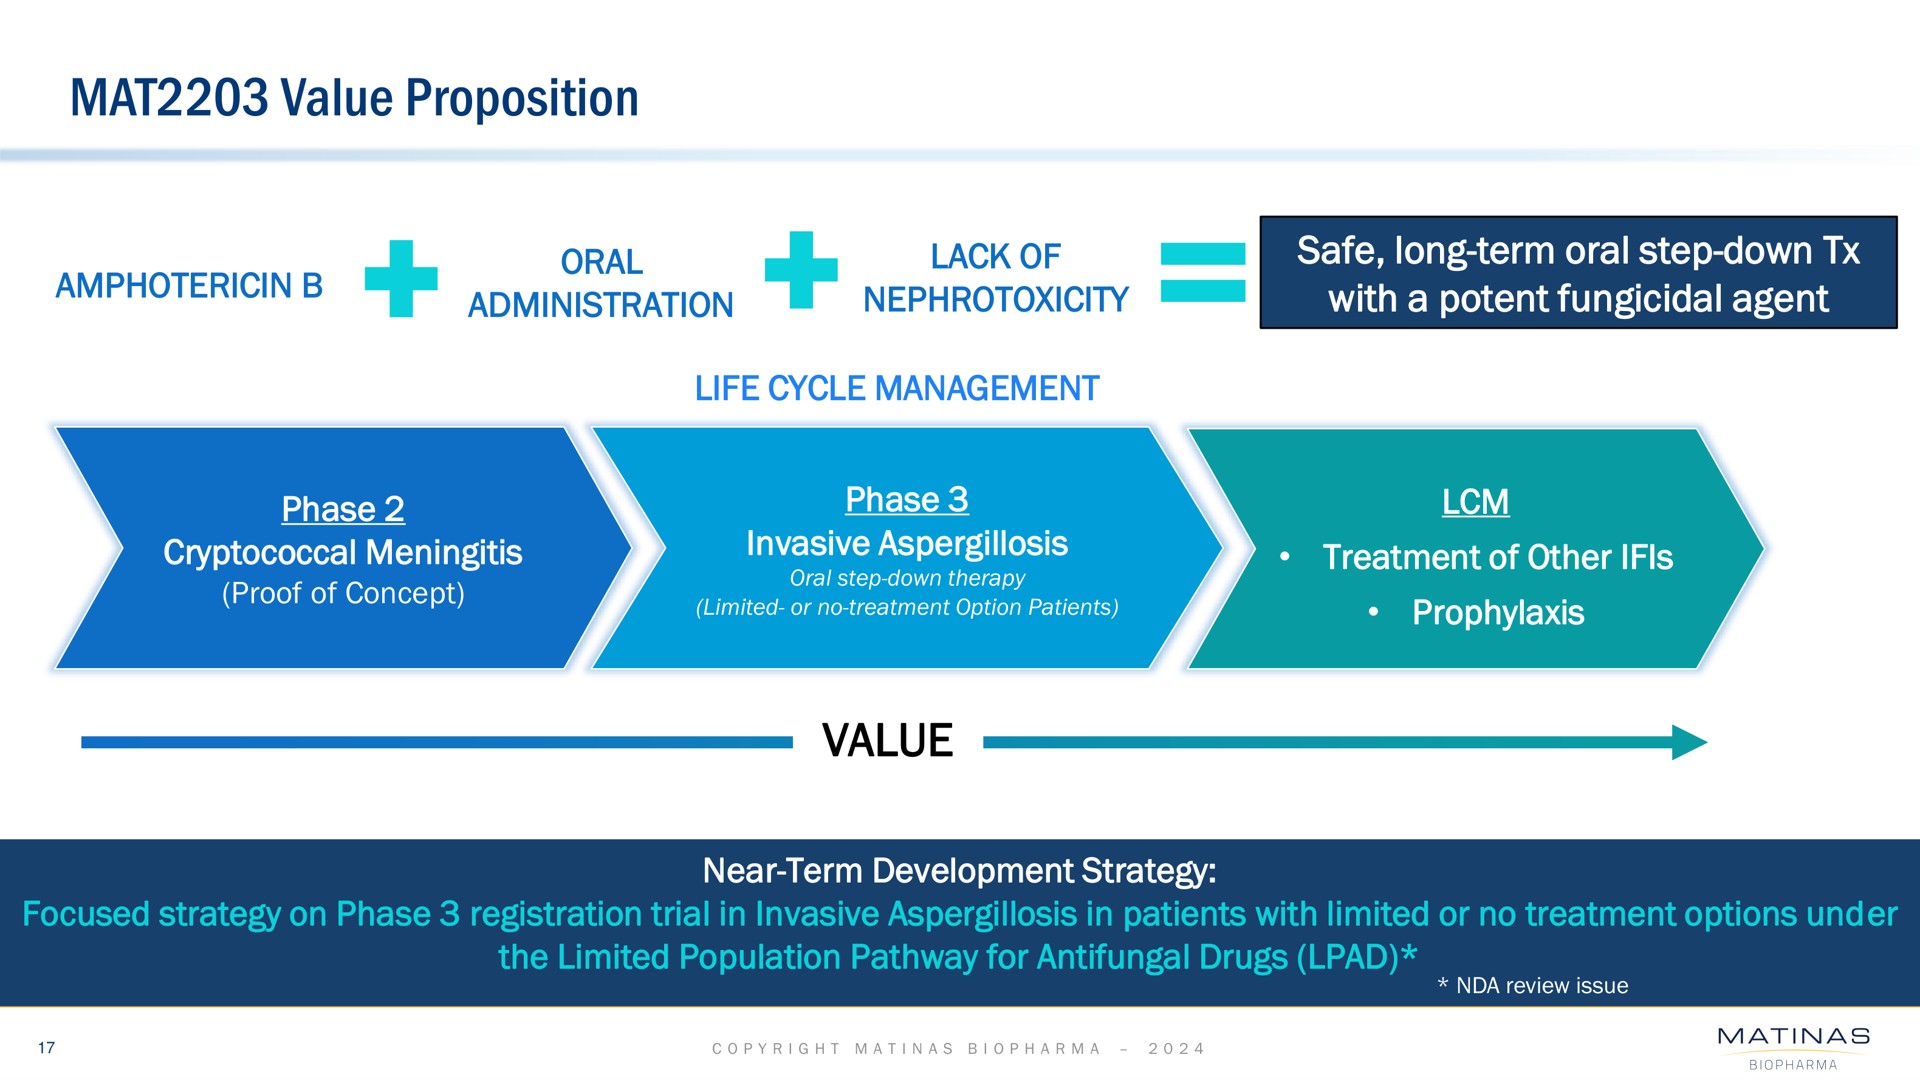 mat value proposition value oral administration of lack of nephrotoxicity safe long term oral step down maw mete calm cal | Matinas BioPharma